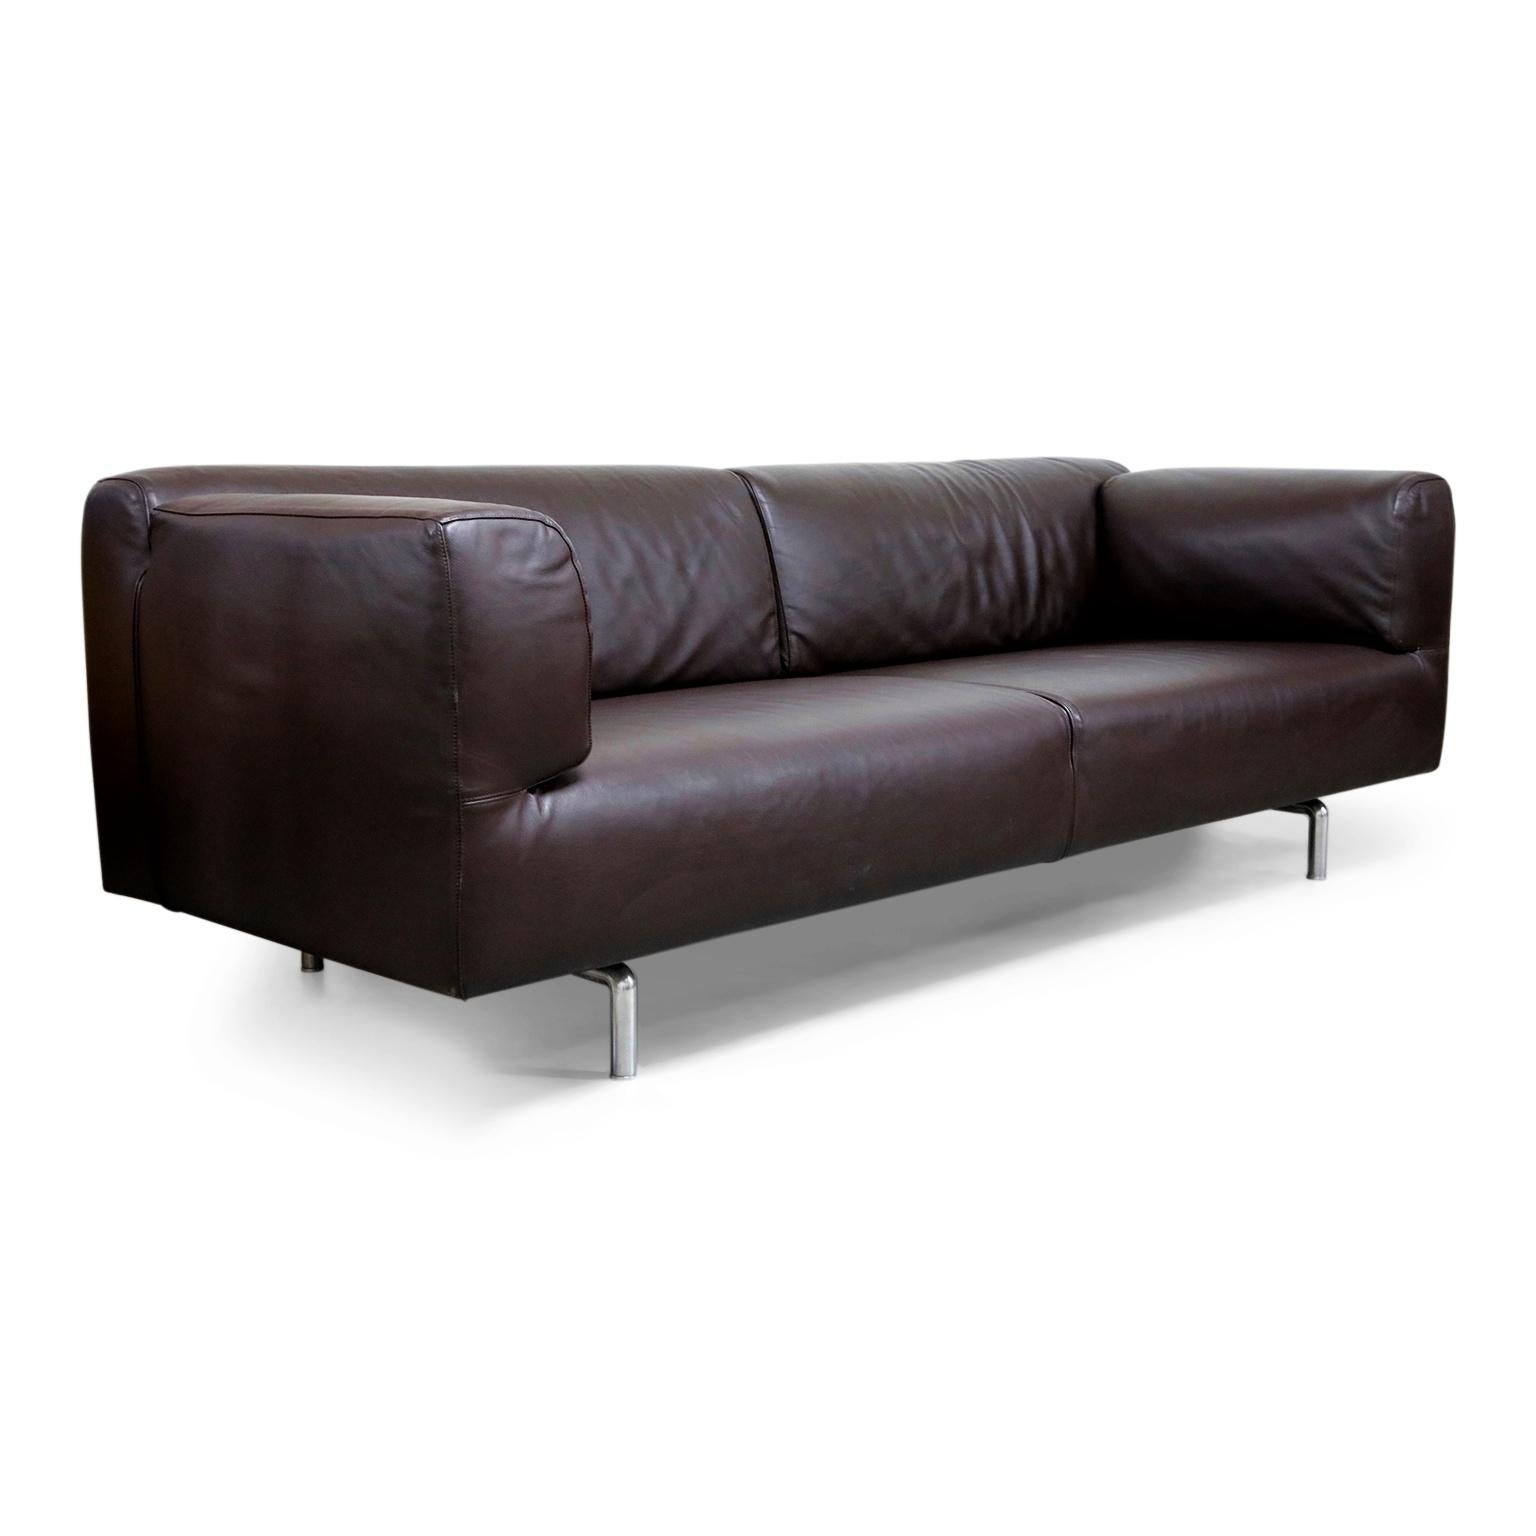 Post-Modern '250 Met Two-Sofa' in Dark Brown Leather by Piero Lissoni for Cassina, Signed